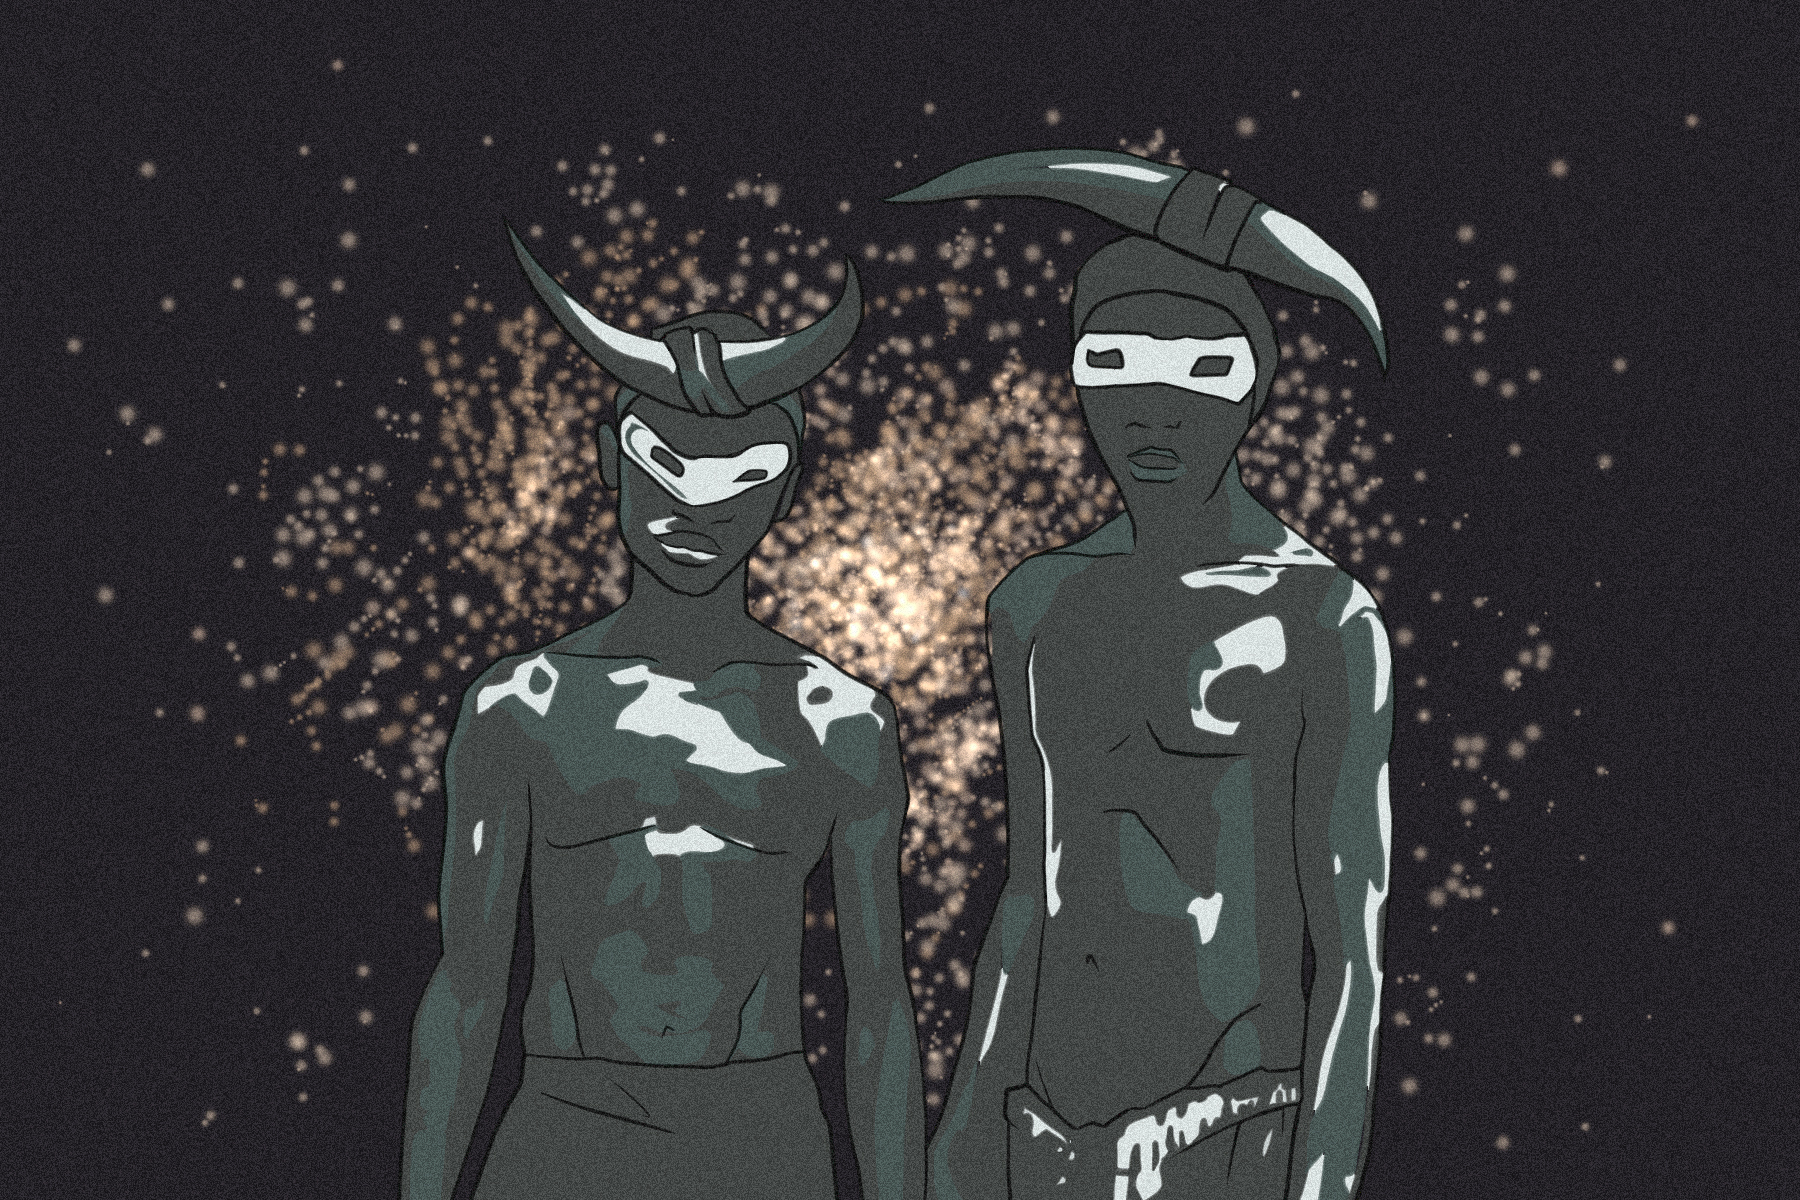 In an article about Black Star No Fear of Time, an illustration of two black-clad figures